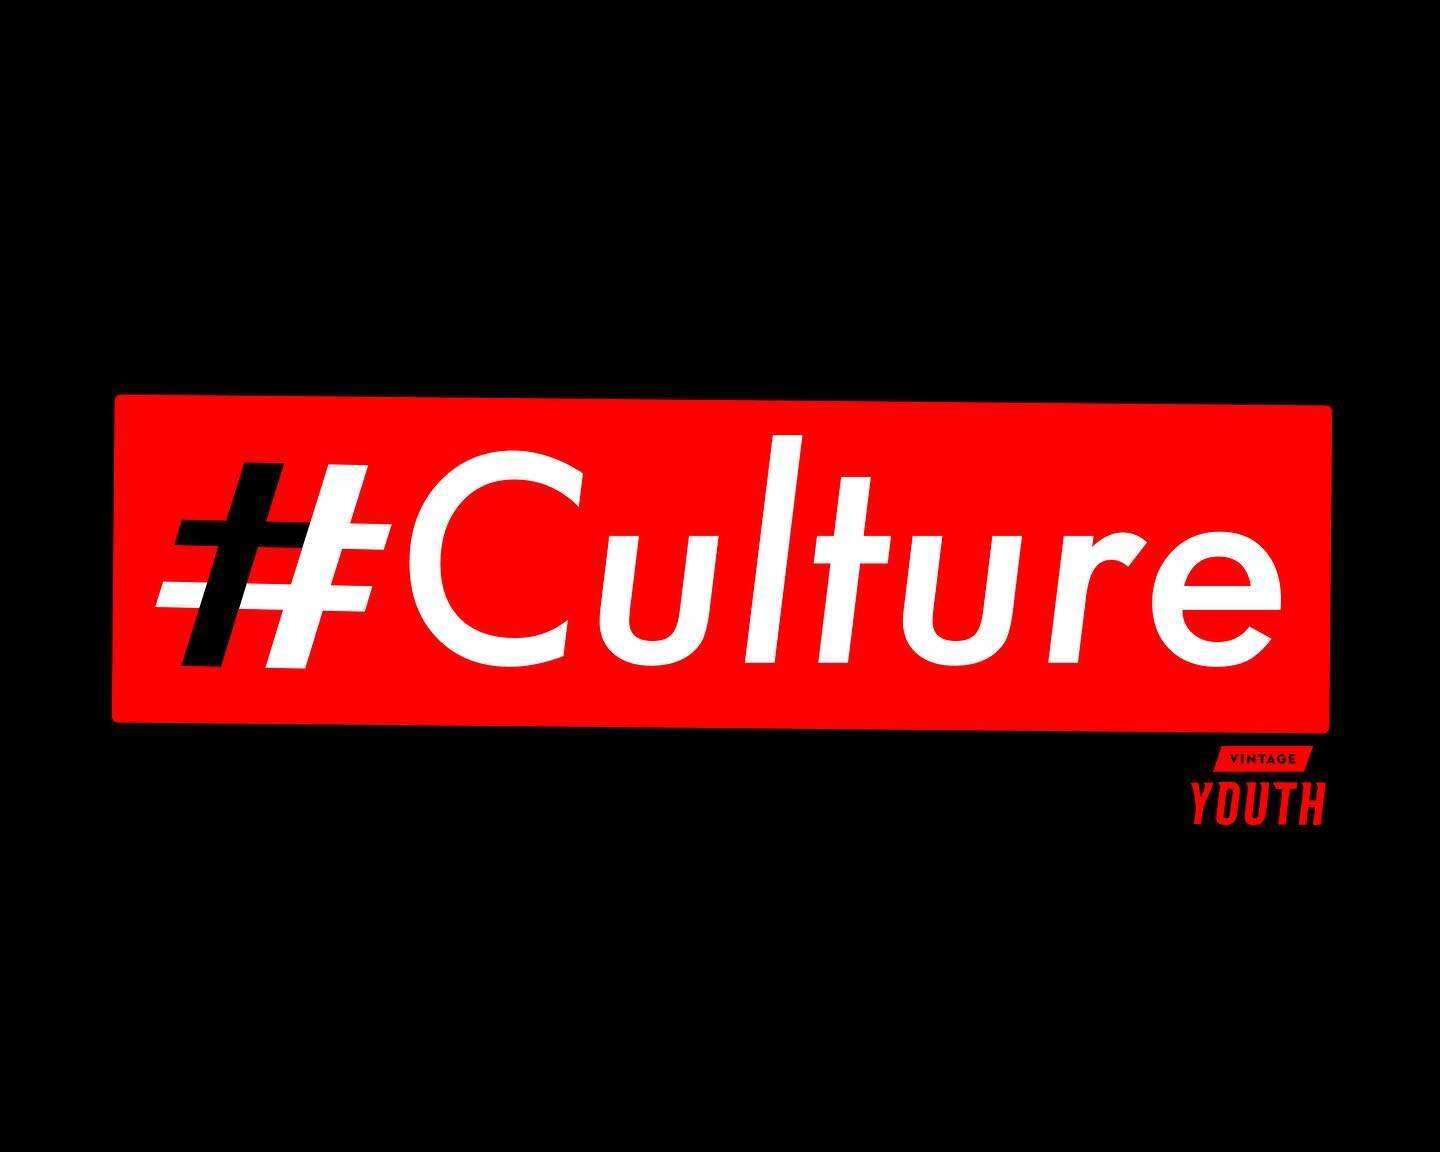 Join us for Midweek tonight at 7pm as we kick off our NEW series #Culture! We will be inside again this week so be sure to bring your mask!!